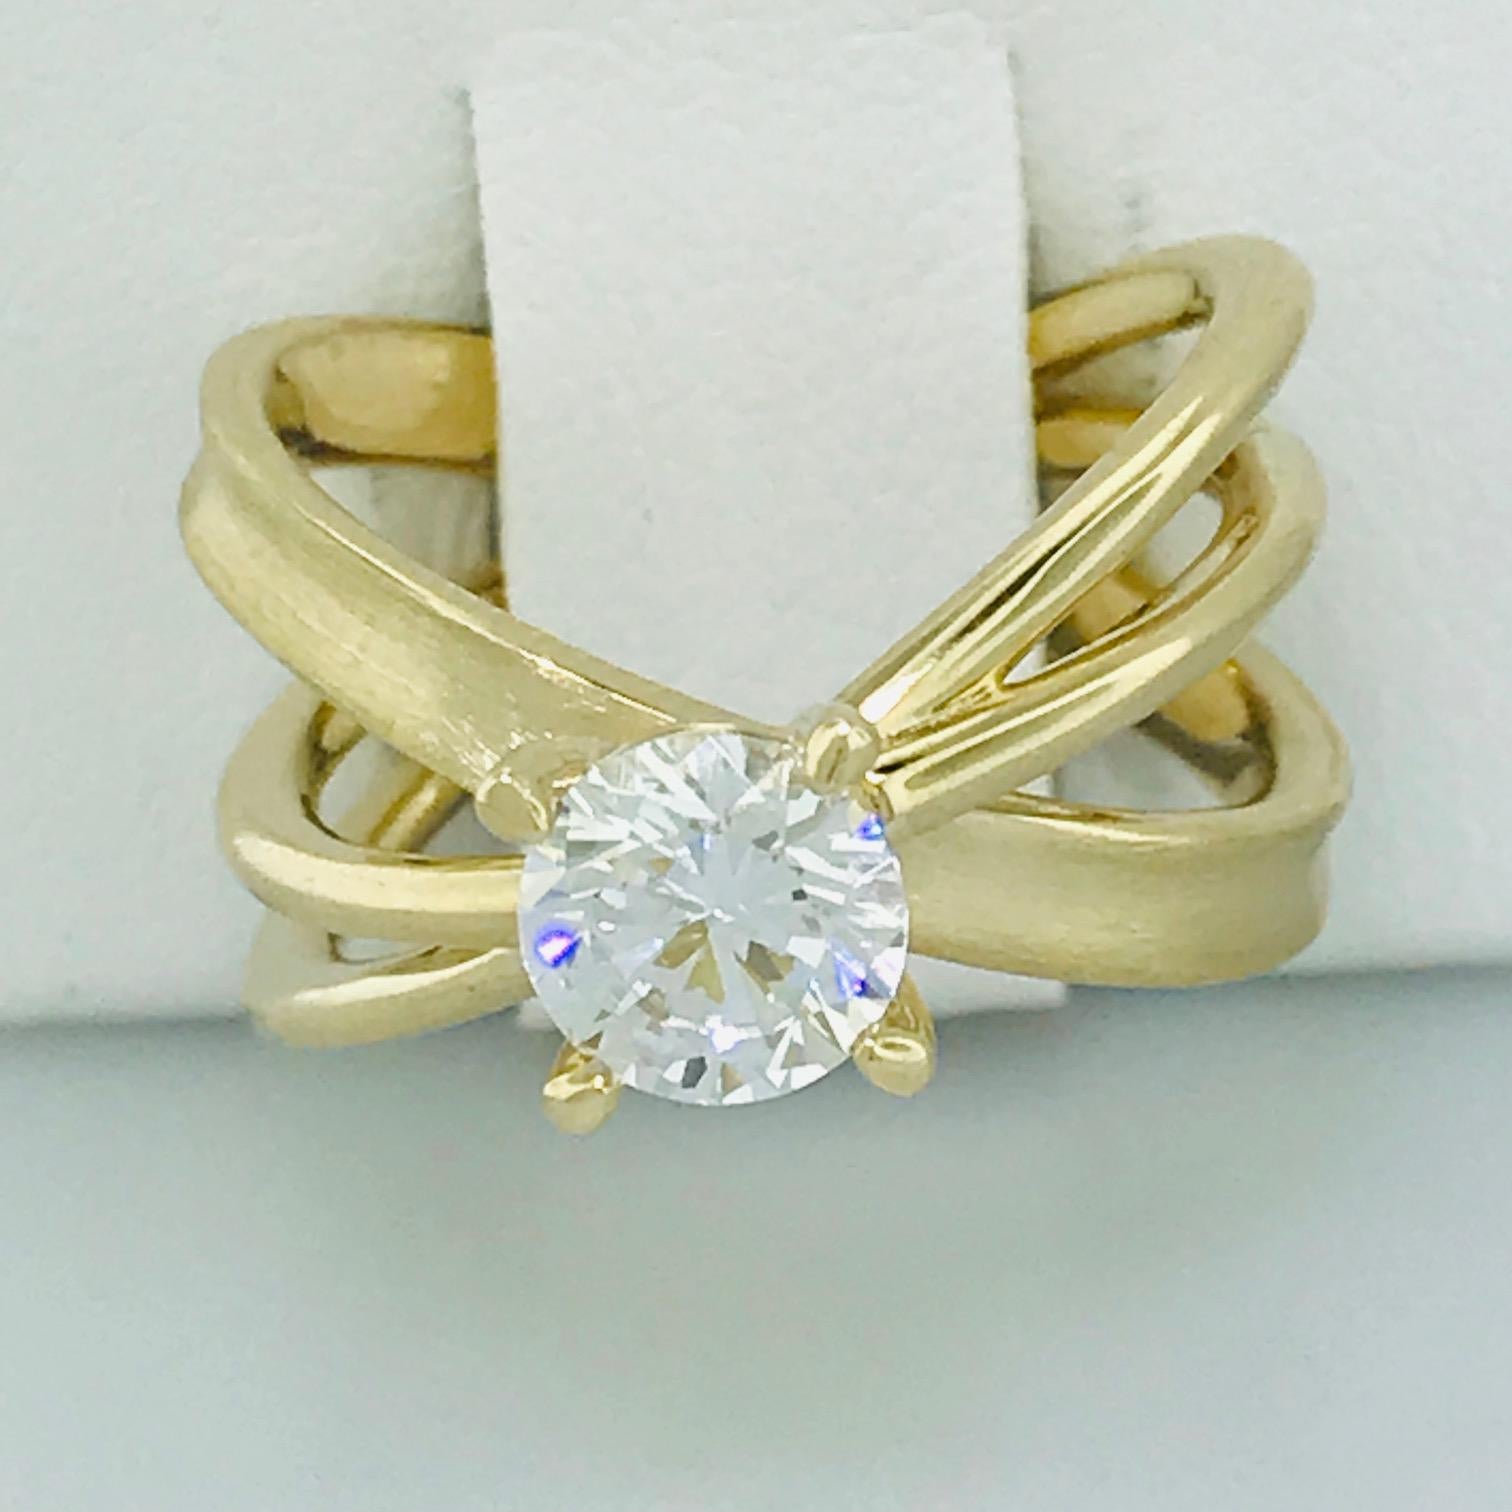 Round Cut 1.00 Carat X Design Solitaire Satin and Polish Ring in 14 Karat Yellow Gold For Sale